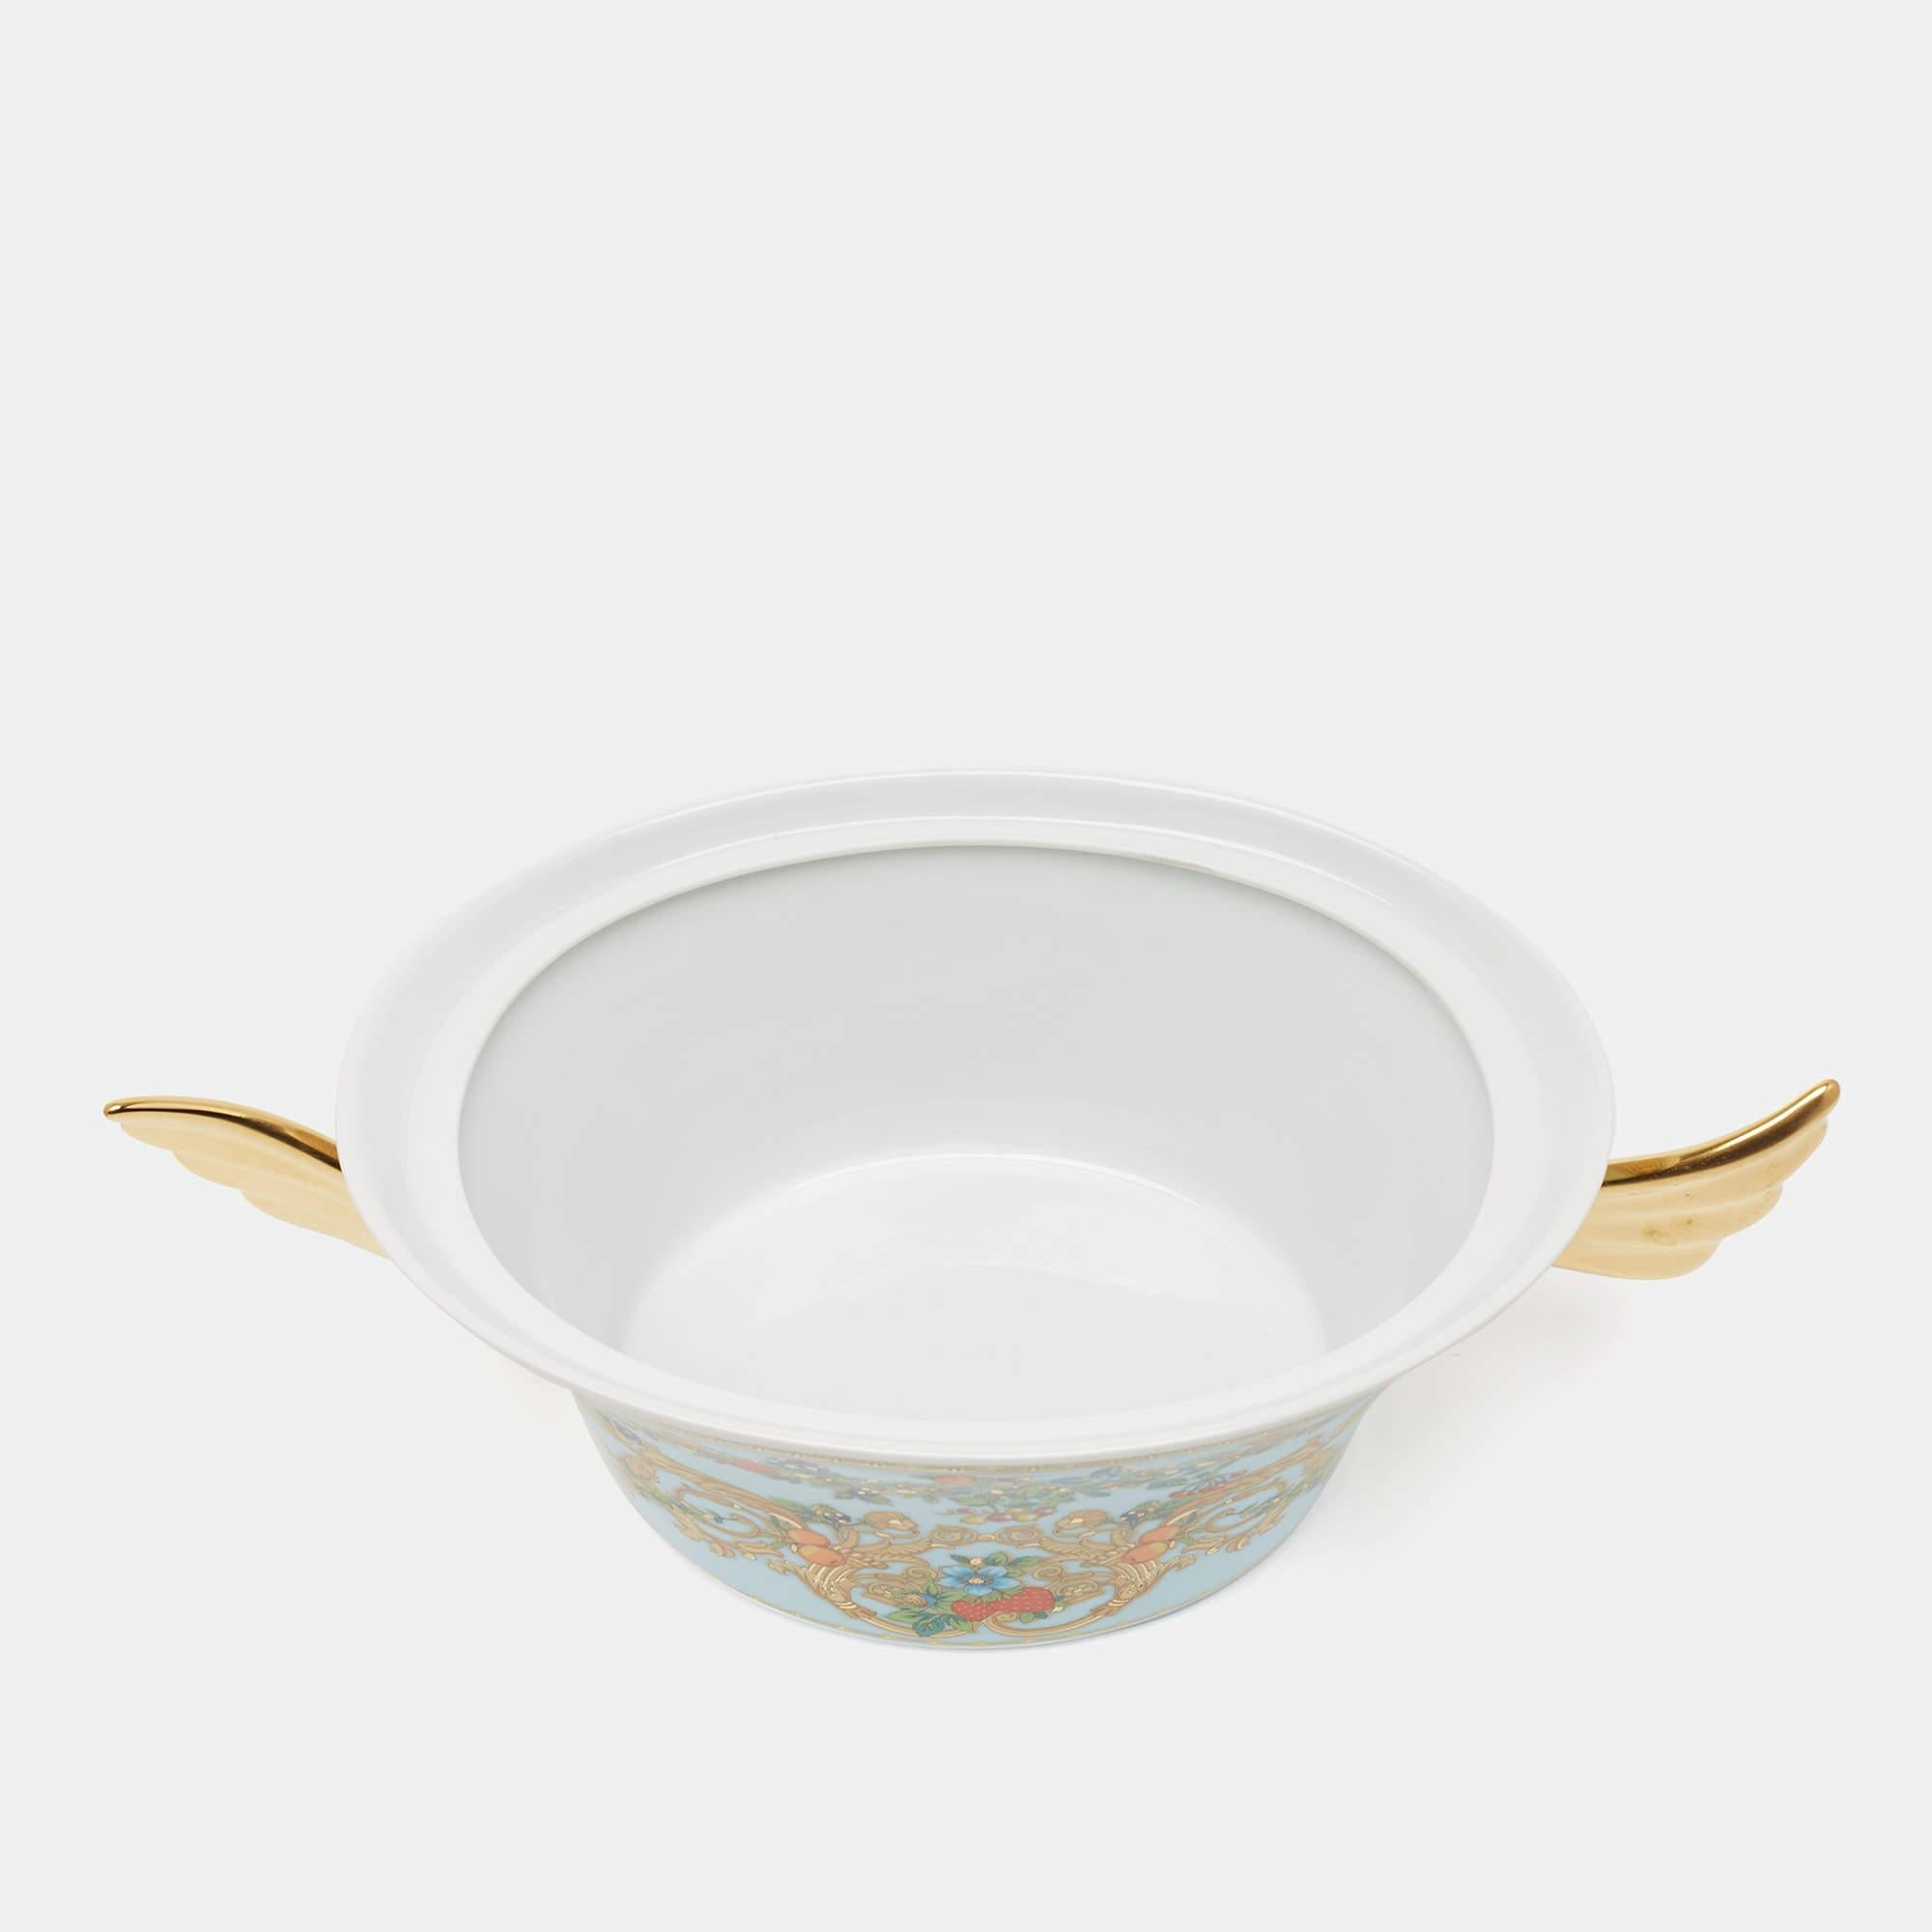 This Ikarus Le jardin de Versace vegetable bowl is from Rosenthal meets Versace. Crafted delicately using high-quality porcelain, it has intricate details that have been carefully applied to project the most elegant appeal.

Includes: Original Box,